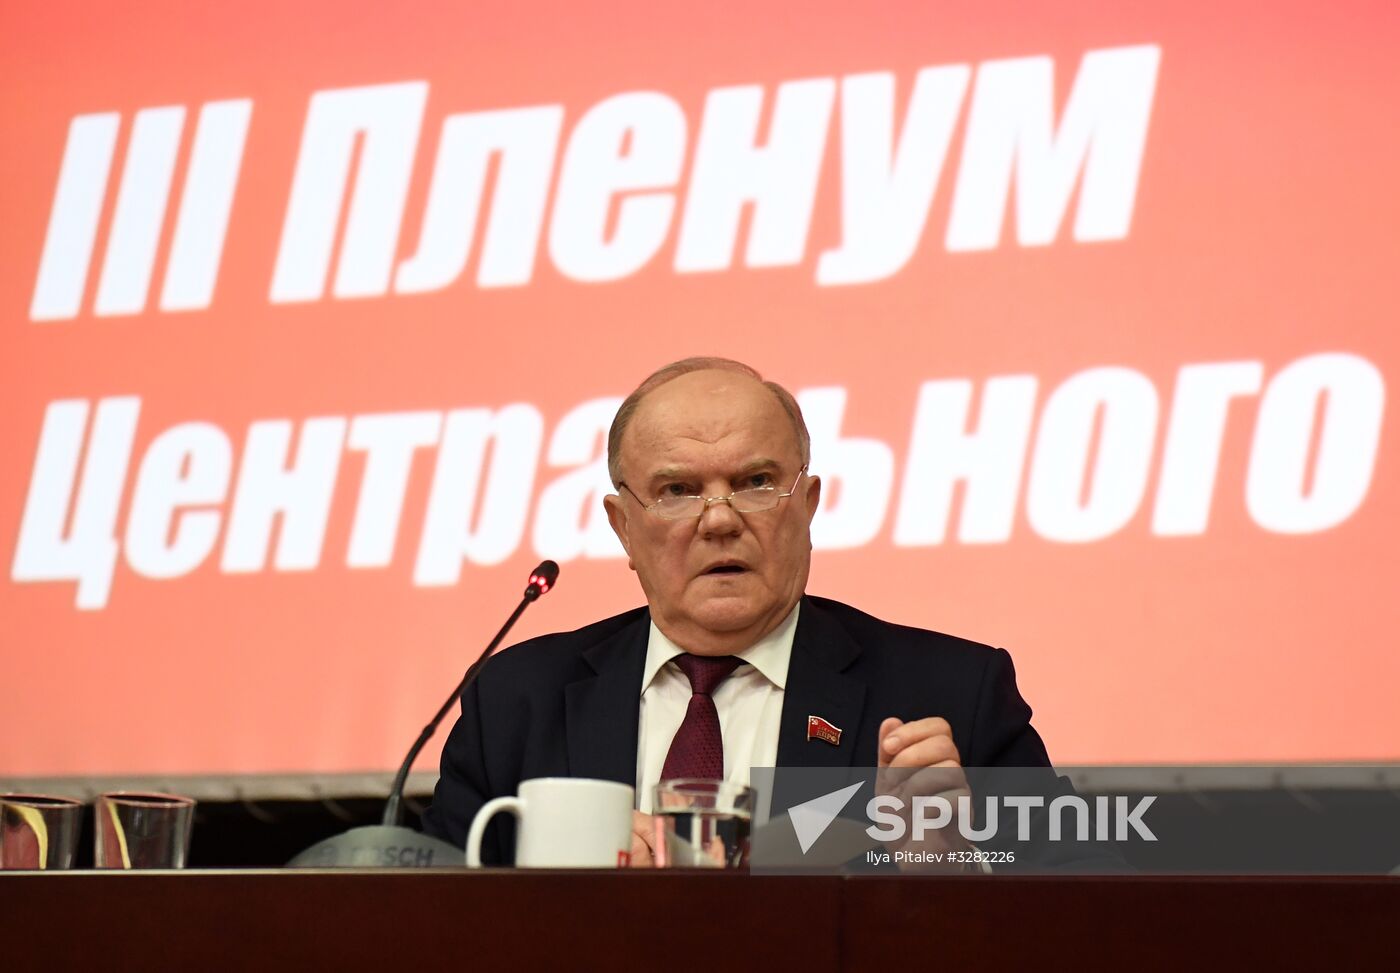 Third Plenum of Russian Communist Party's Central Committee